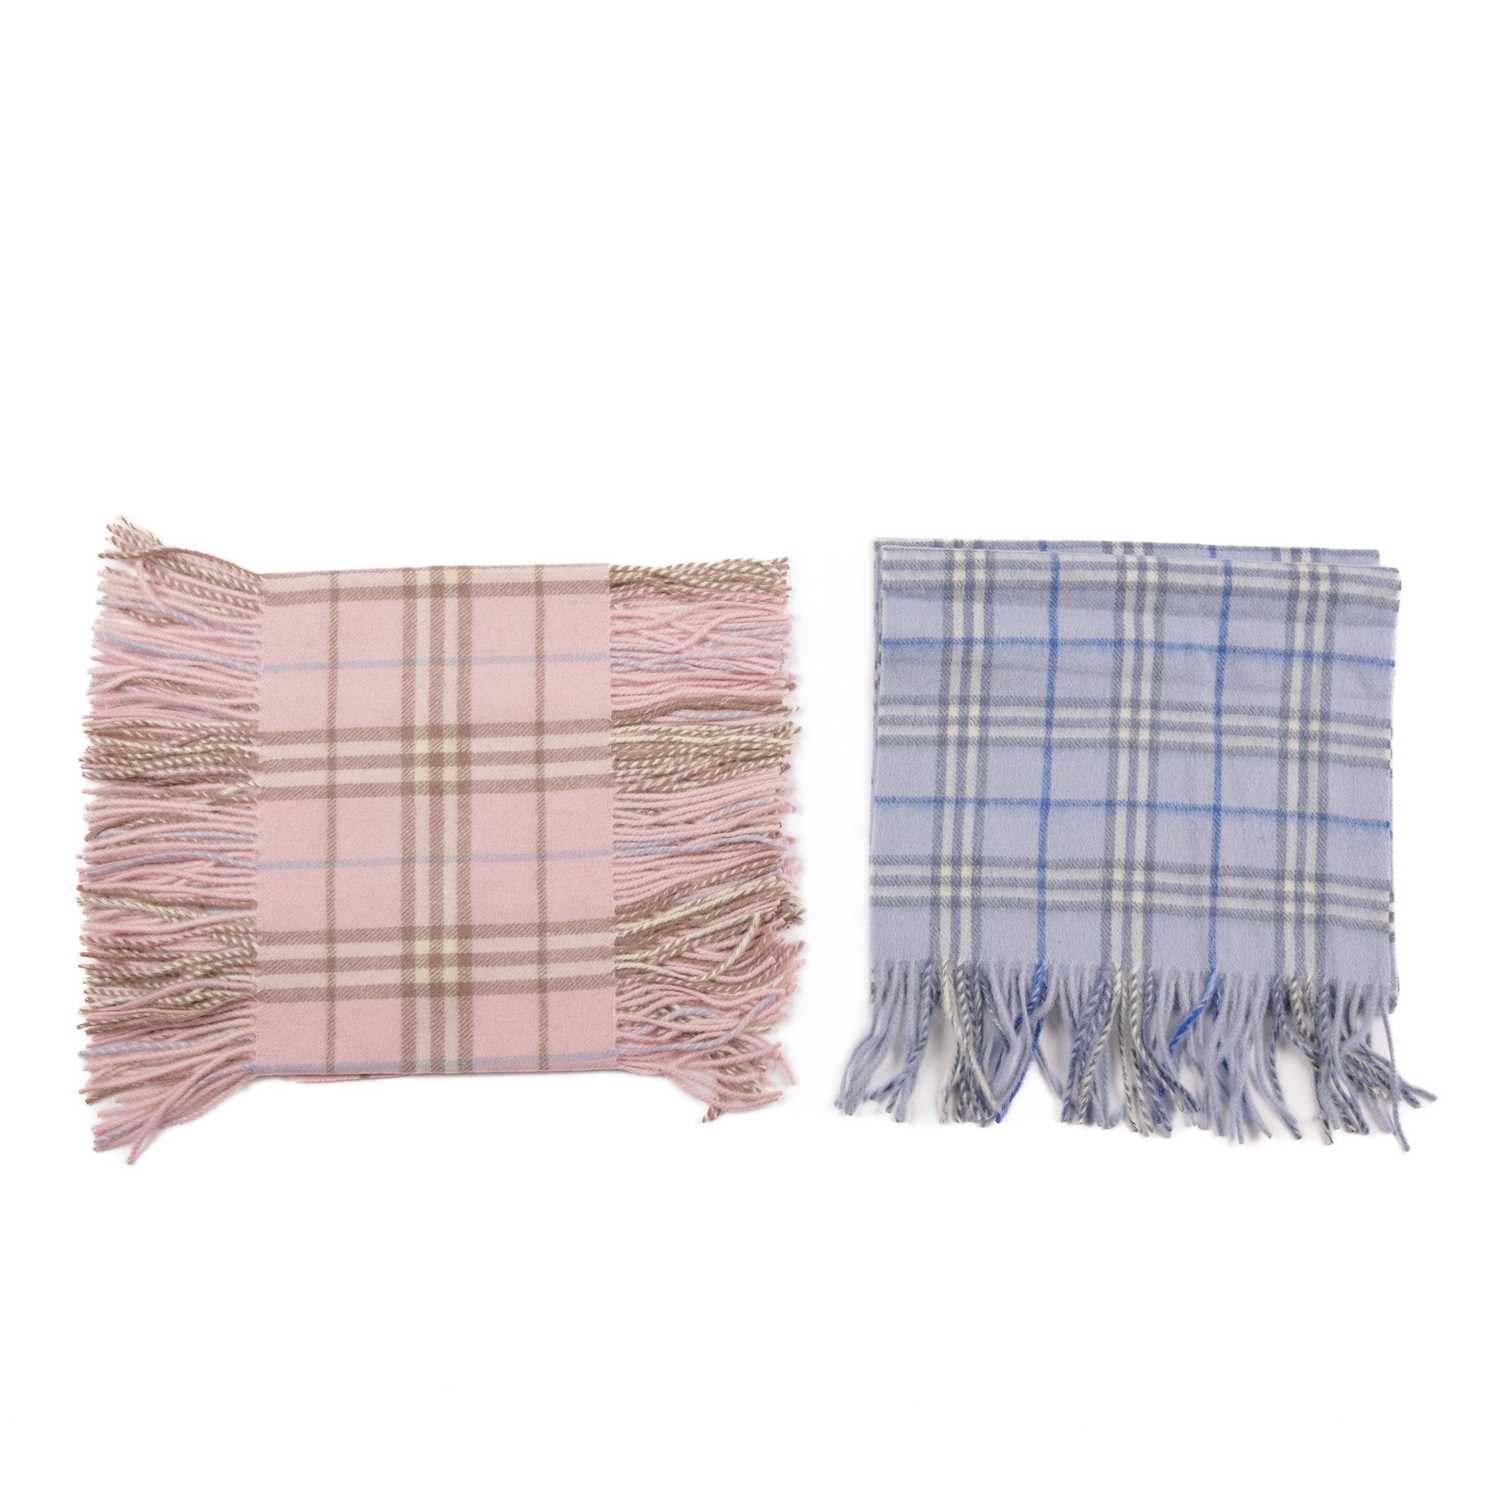 Burberry, two Nova Check lambswool scarves, to include a light blue scarf with fringe detailing at